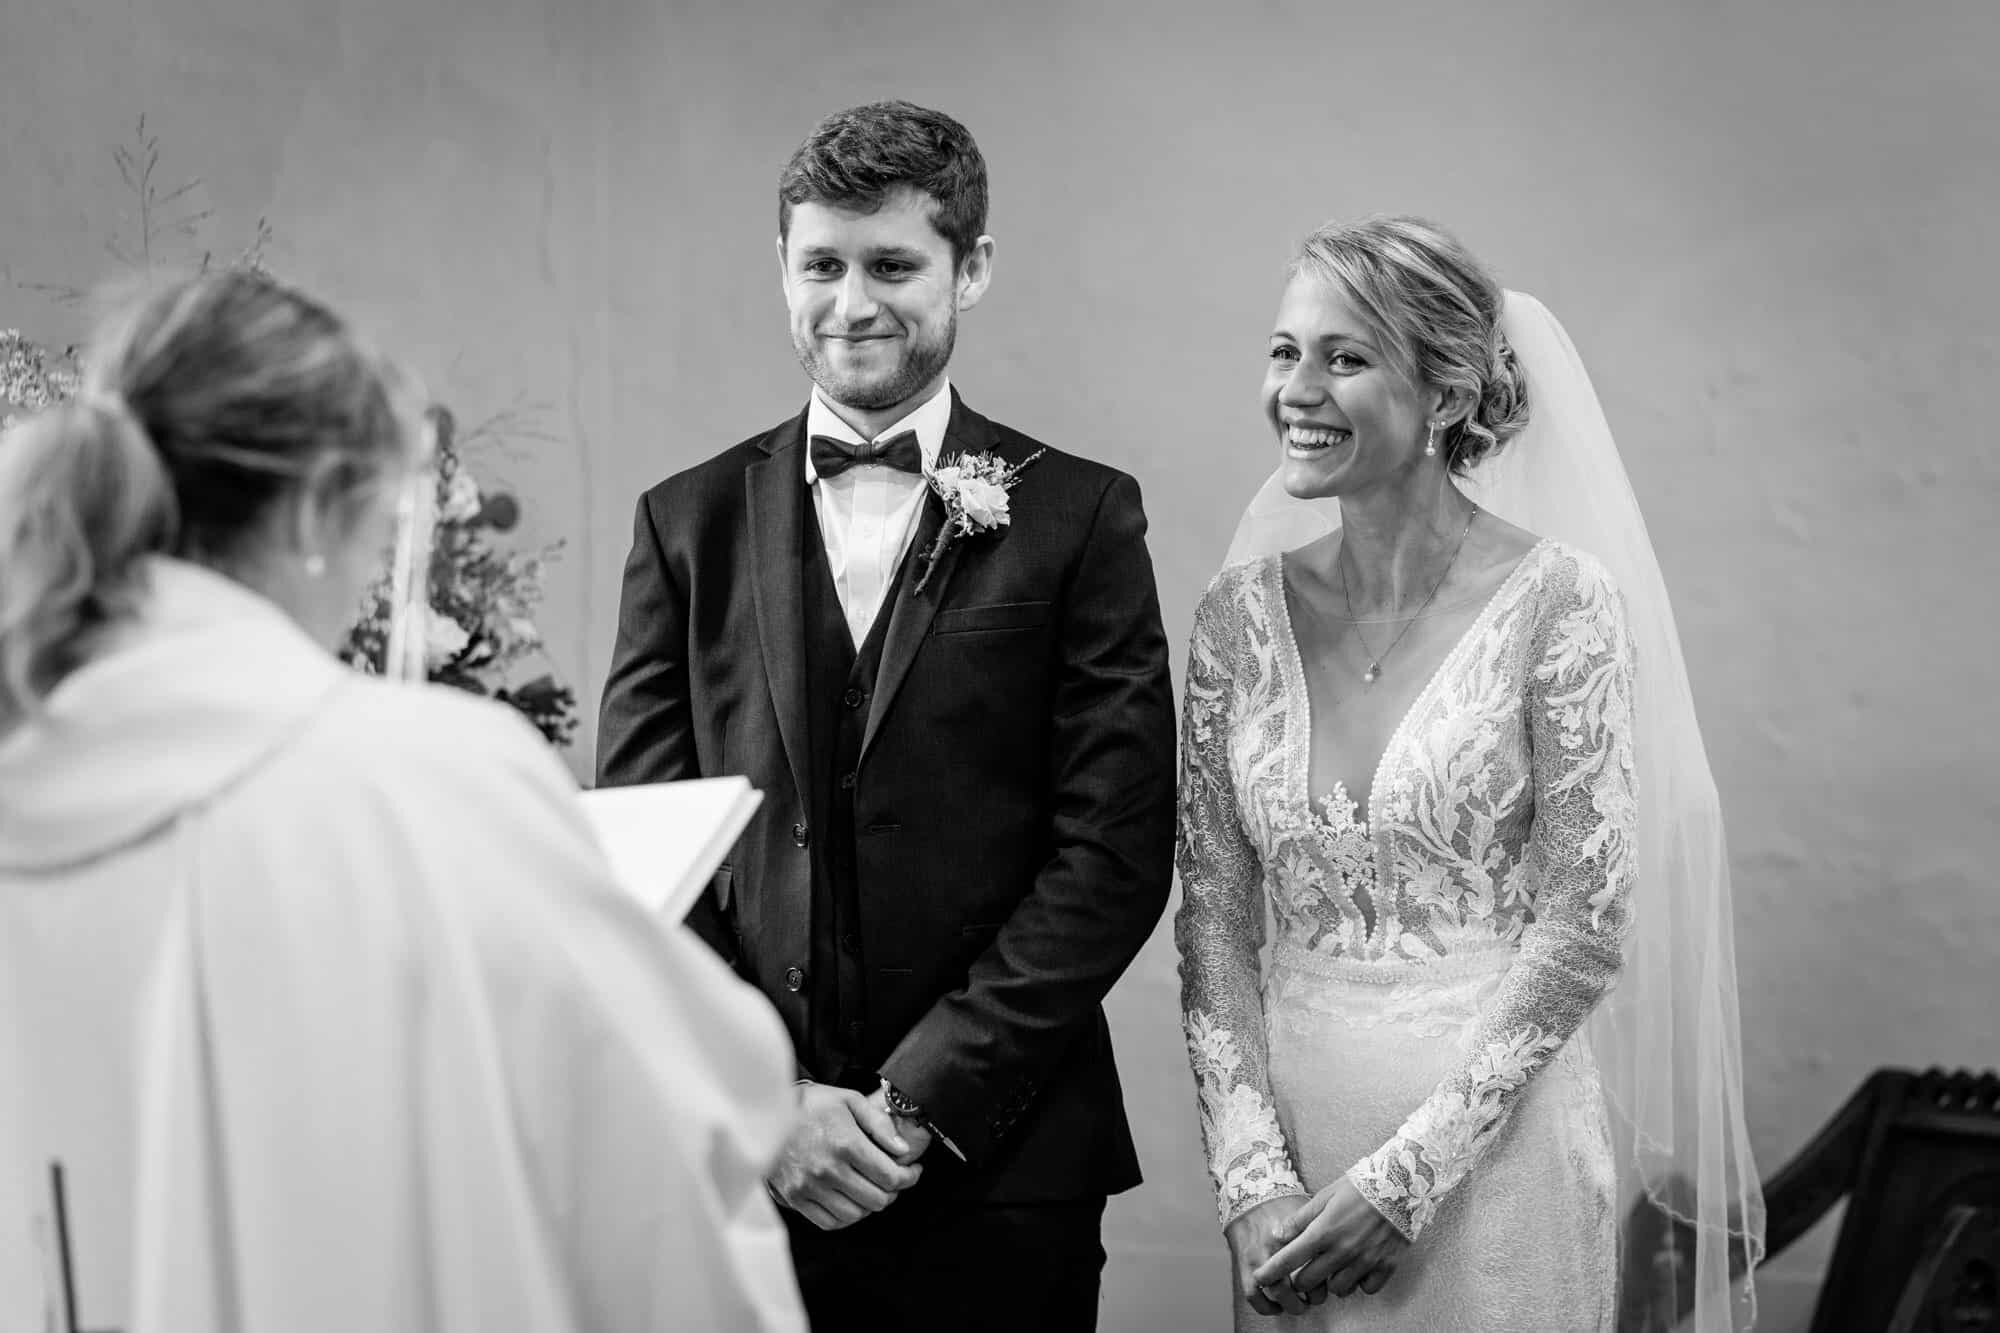 More laughter during wedding vows